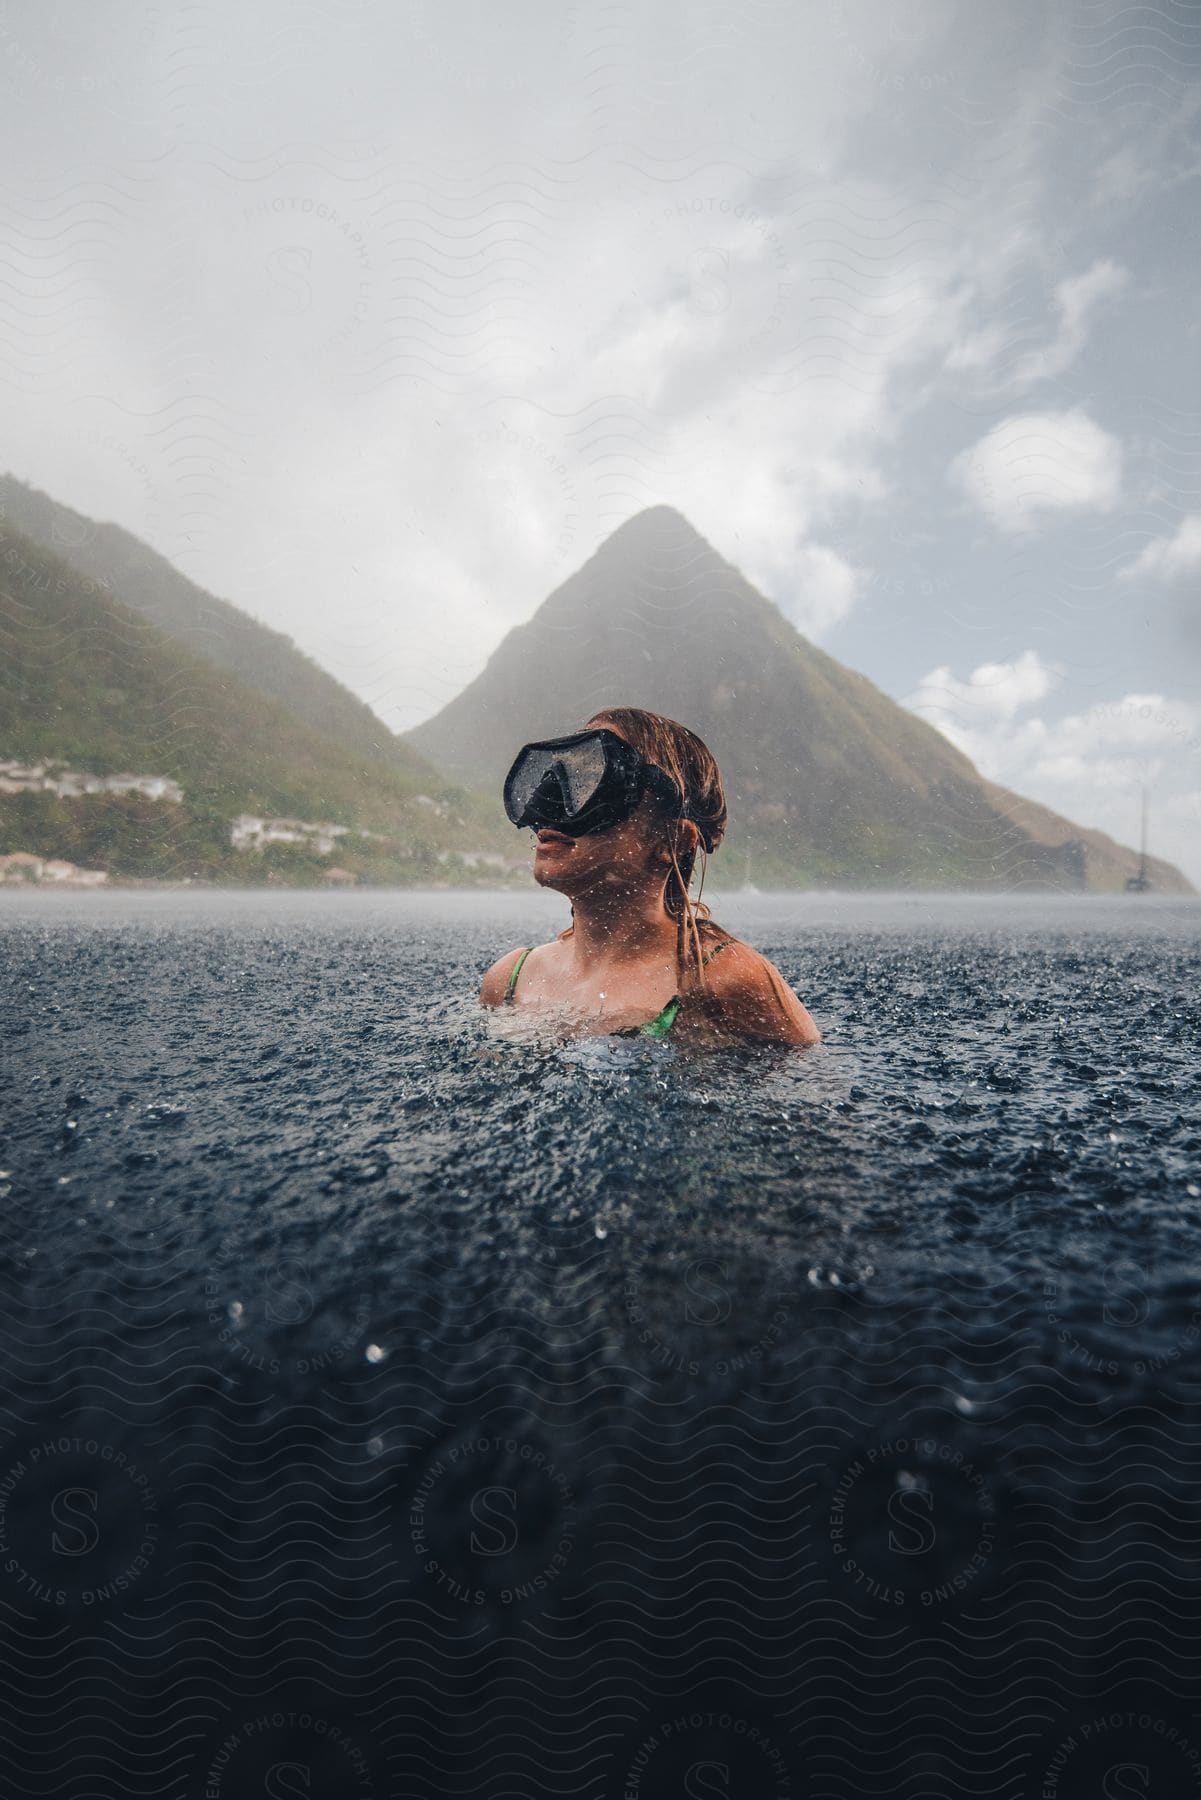 A woman swims in the ocean with goggles on her face raindrops on the waters surface and a mountain in the background as rain falls from cloudy skies